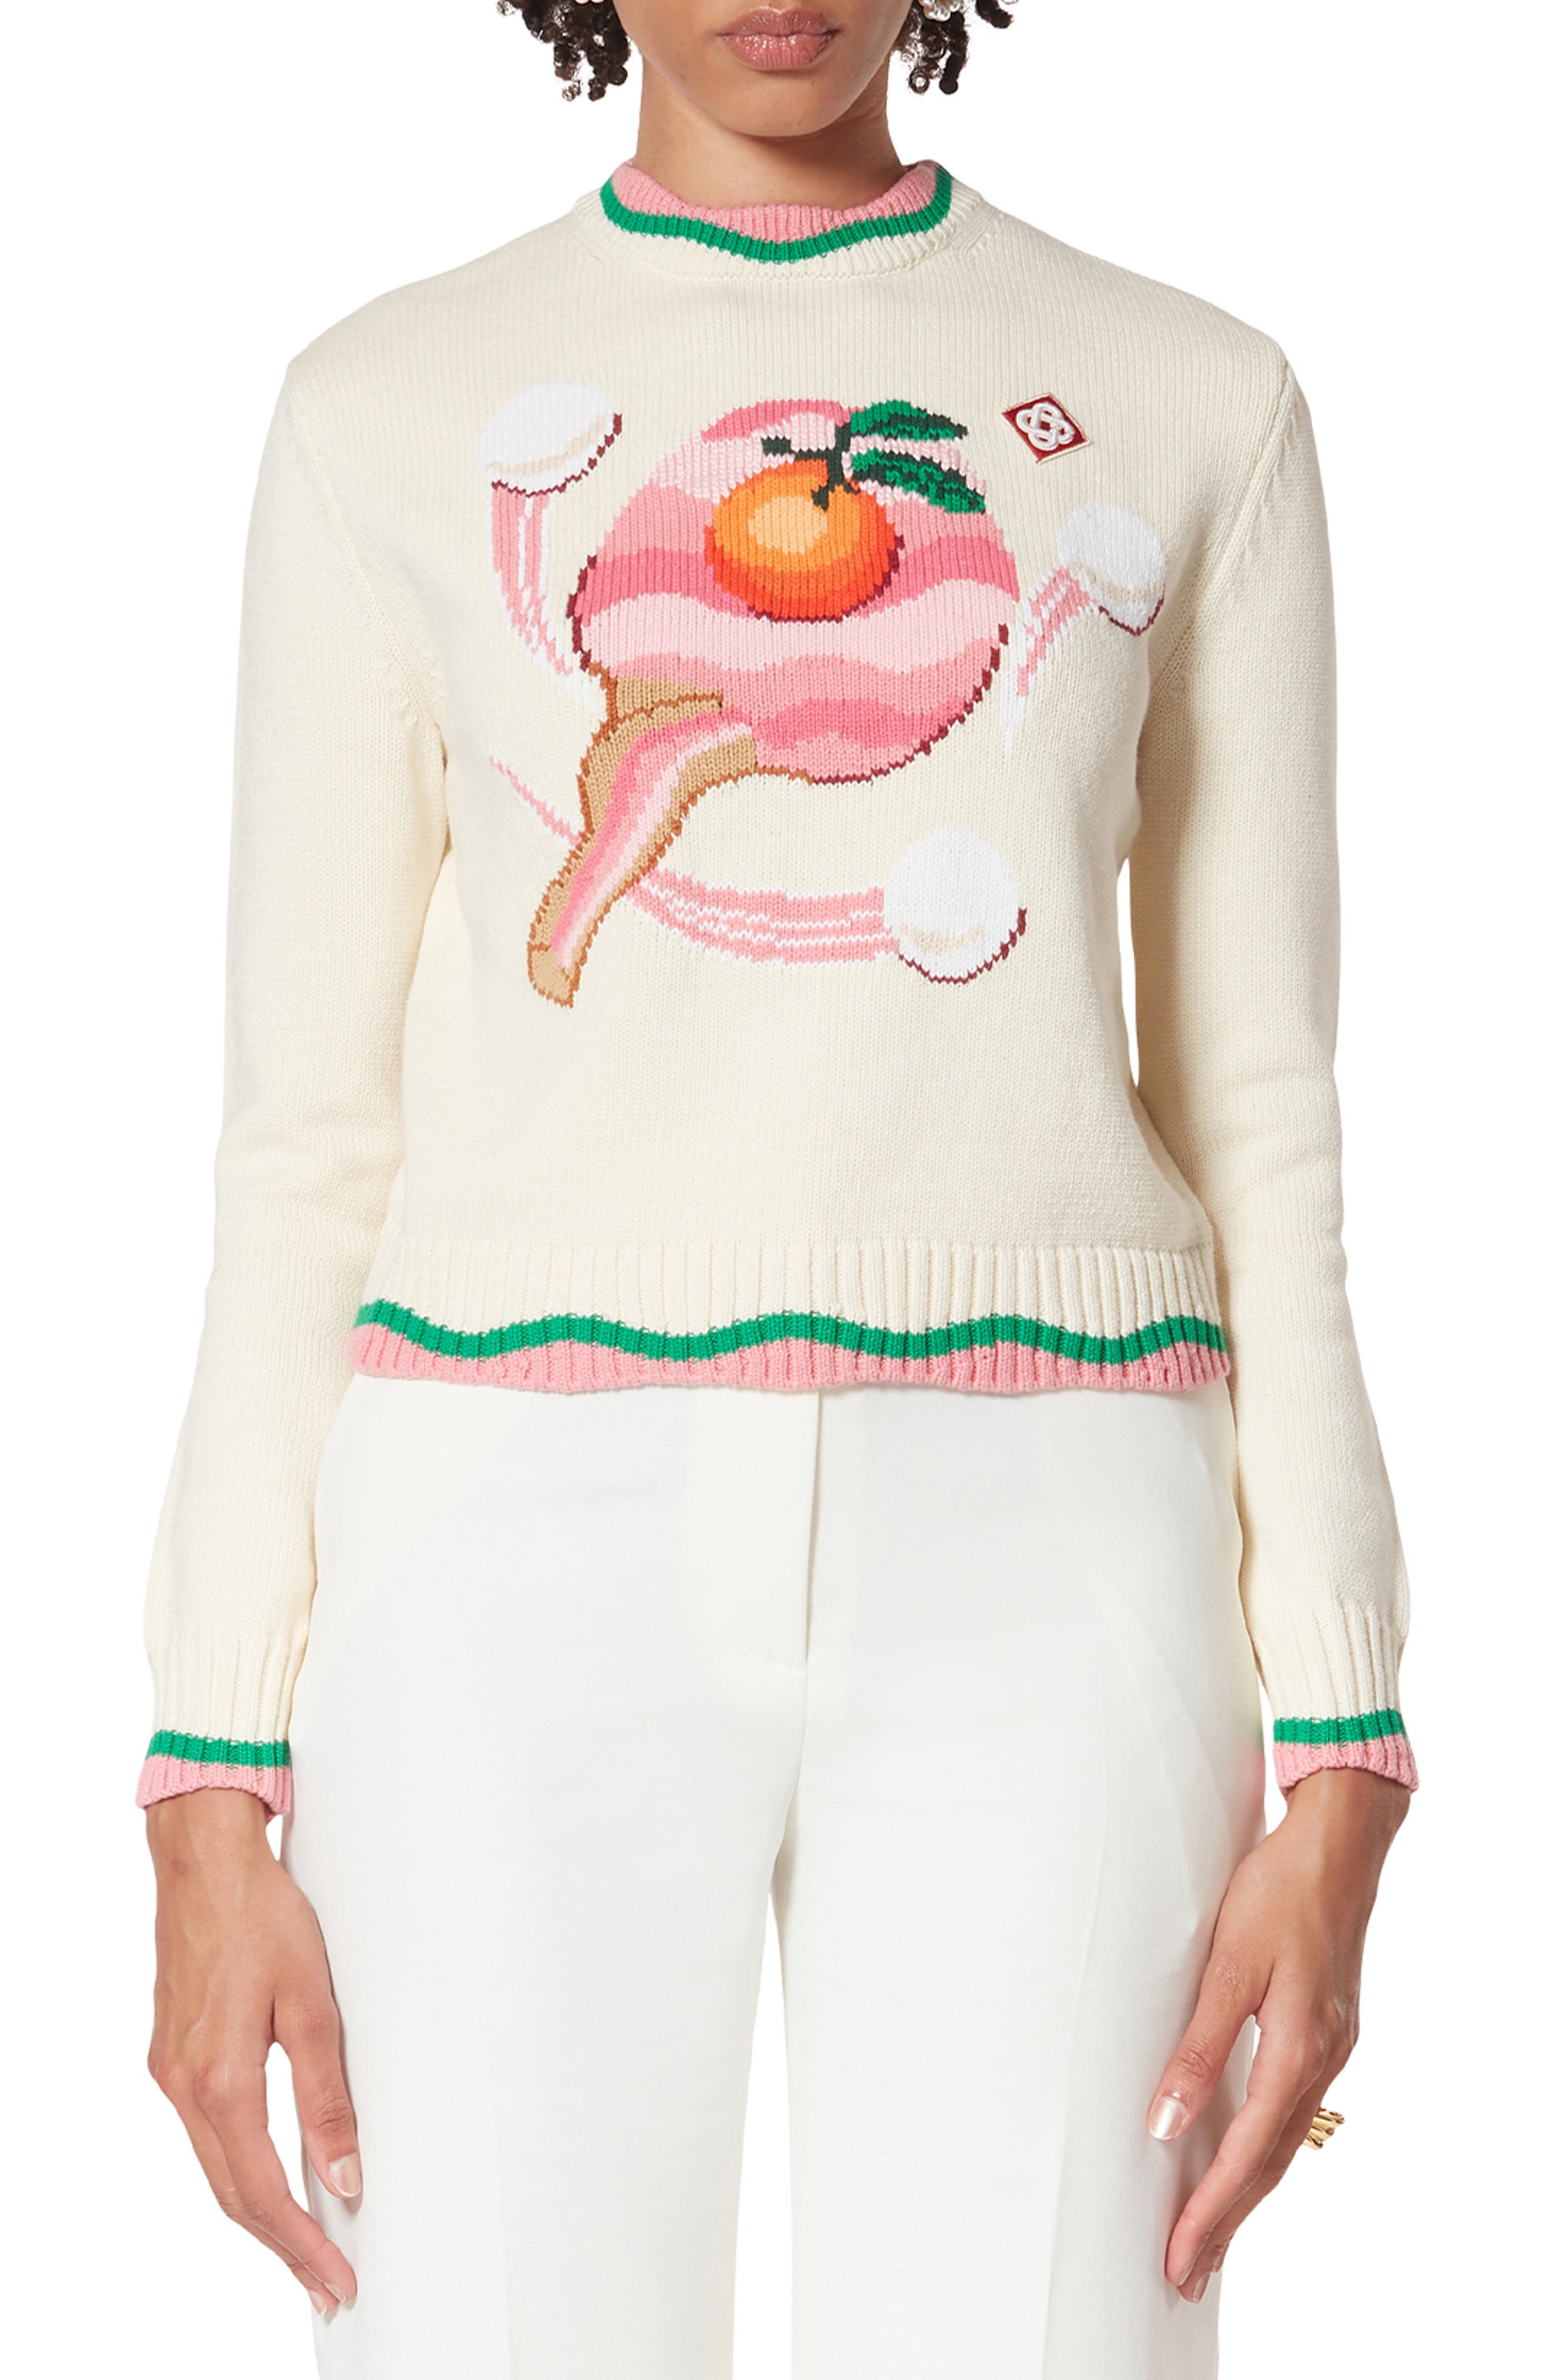 Casablanca Intarsia Cotton Sweater in Le Jeu De Ping Pong at Nordstrom, Size X-Small